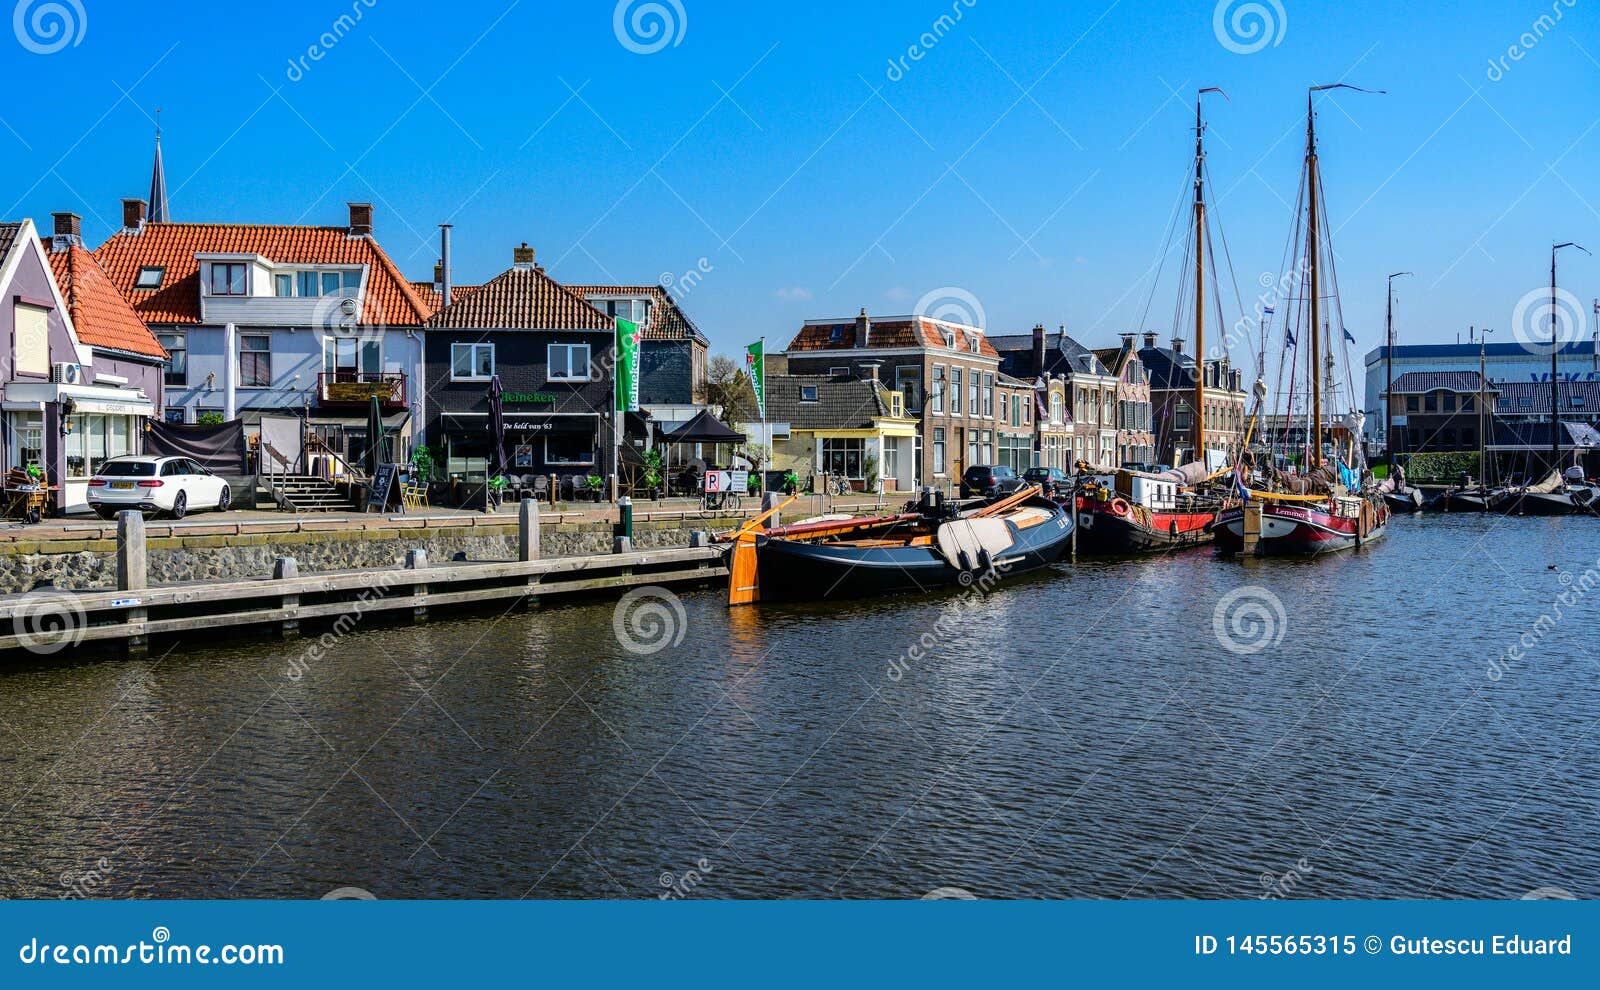 atmosfeer Bloedbad Onophoudelijk Small Dutch Port in Small Town from Netherlands Stock Image - Image of  architectural, castle: 145565315